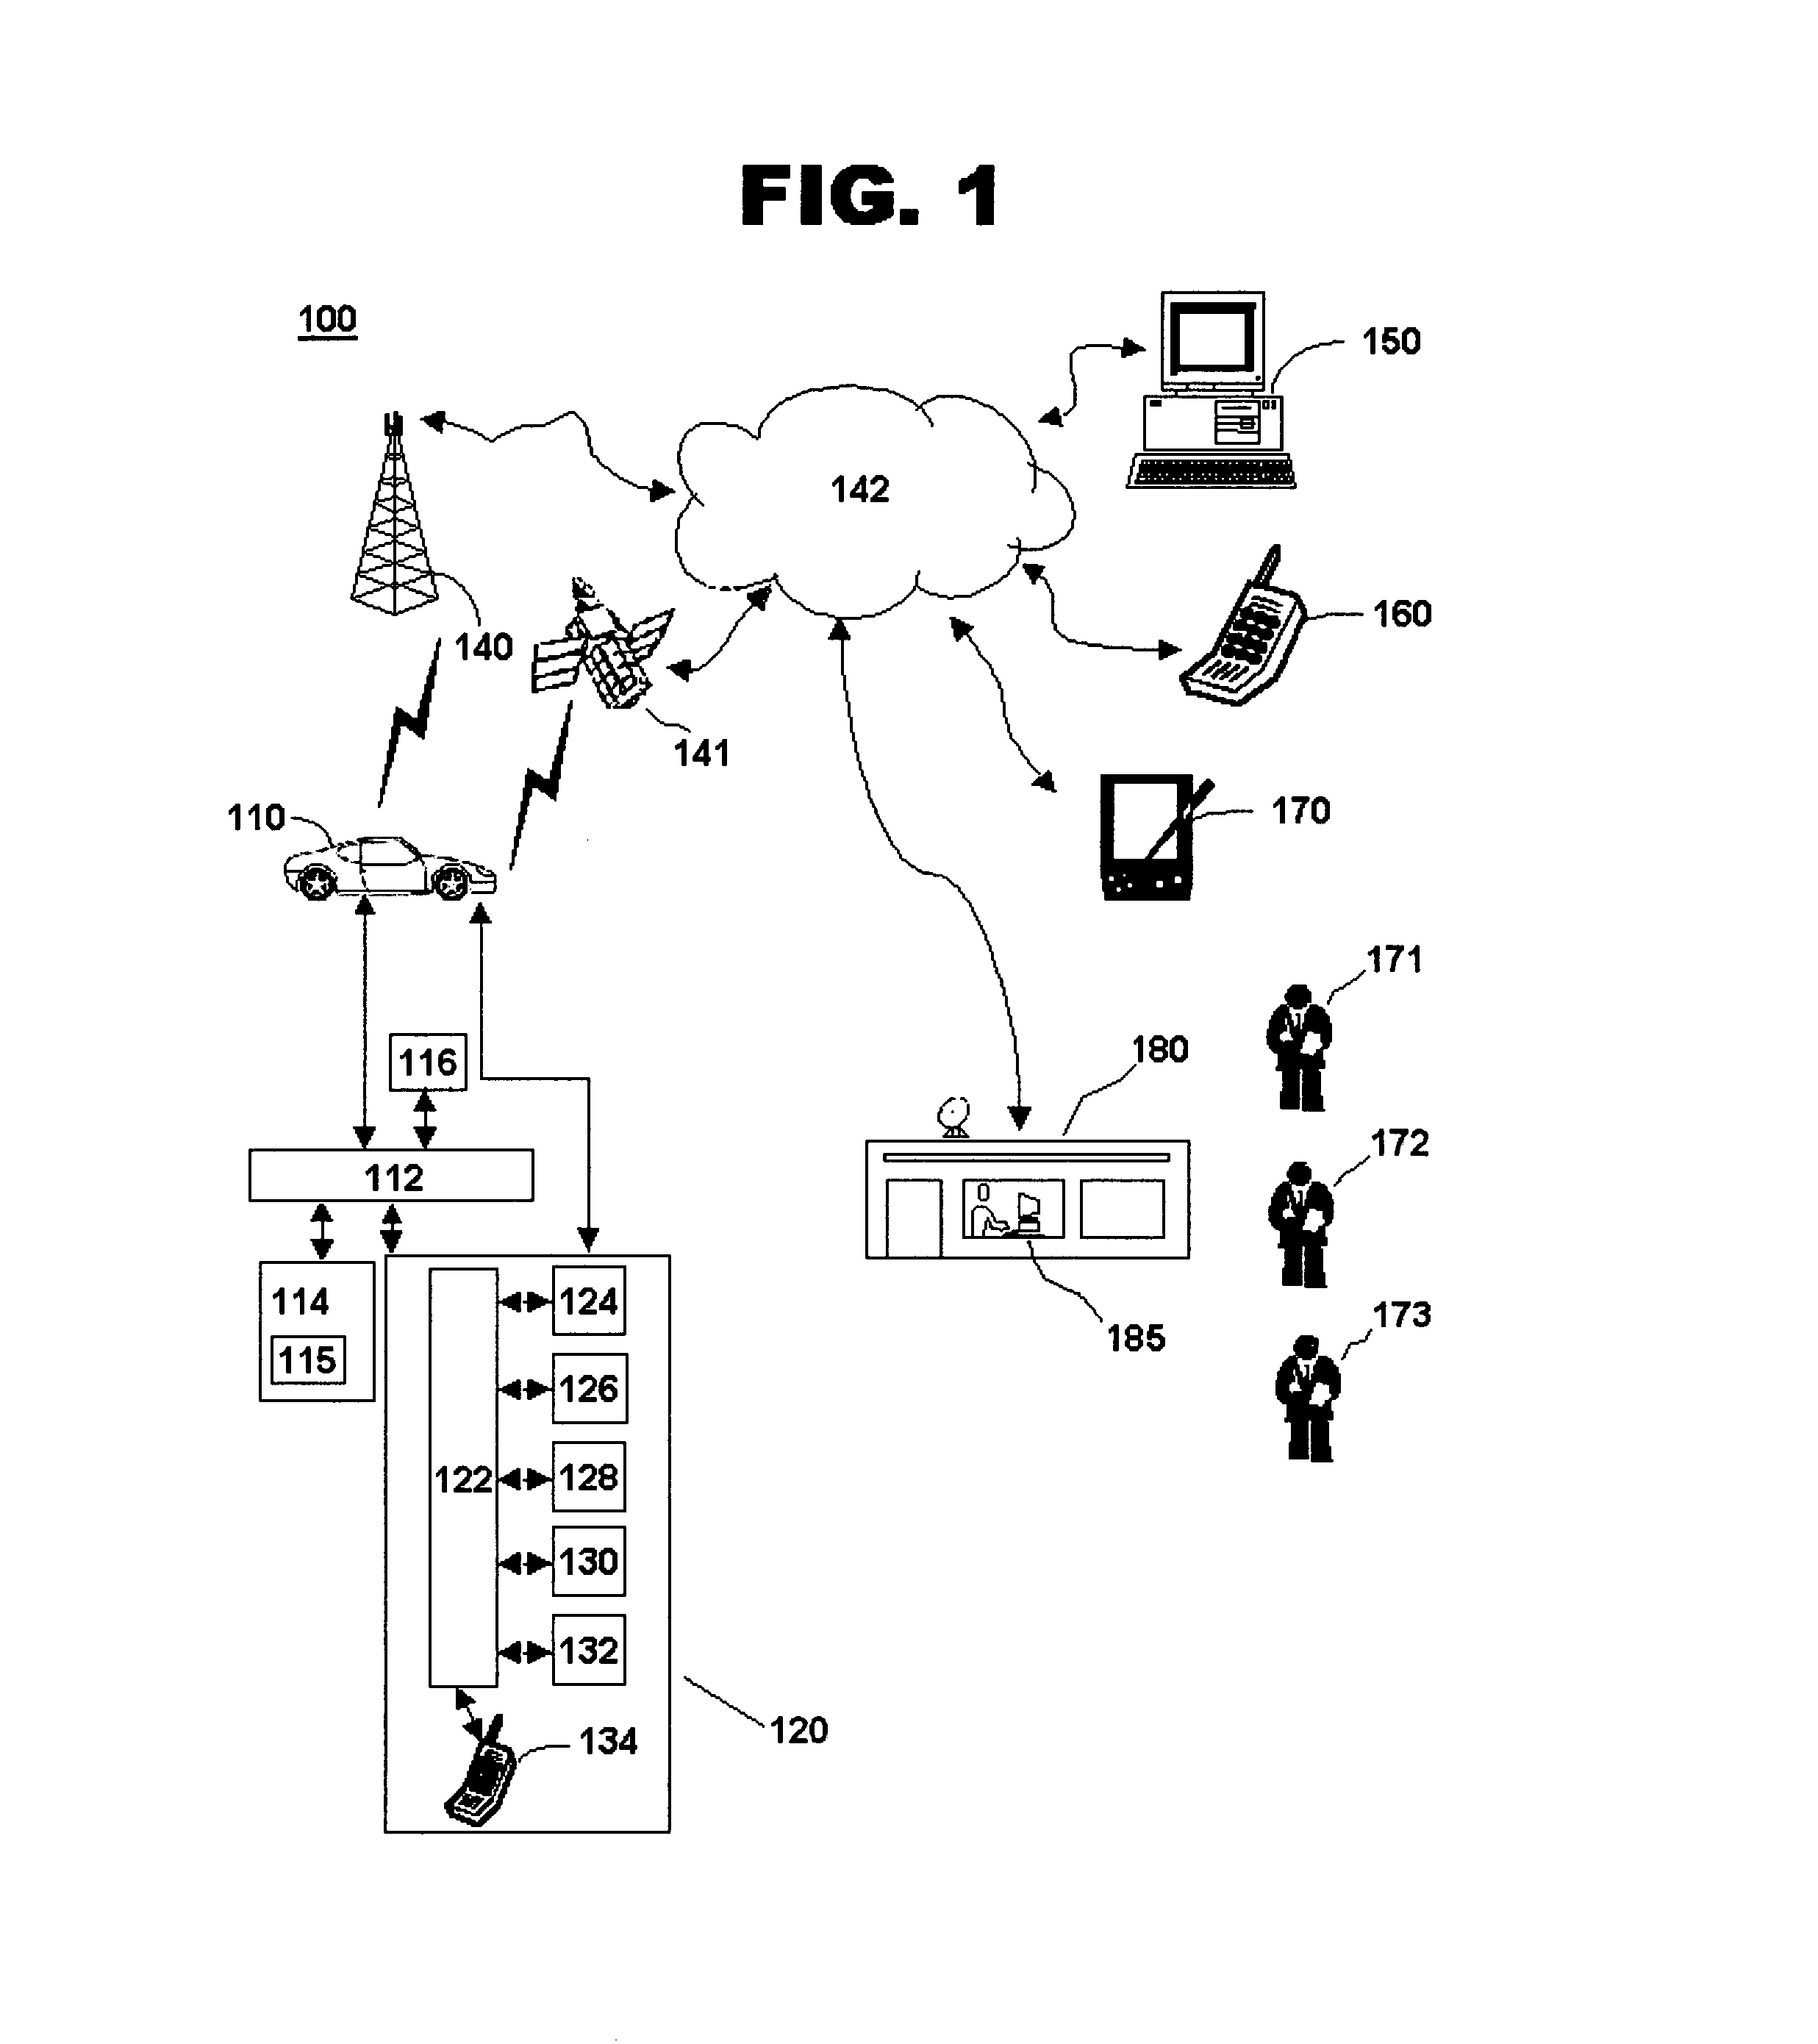 Automated electronic module configuration within a vehicle